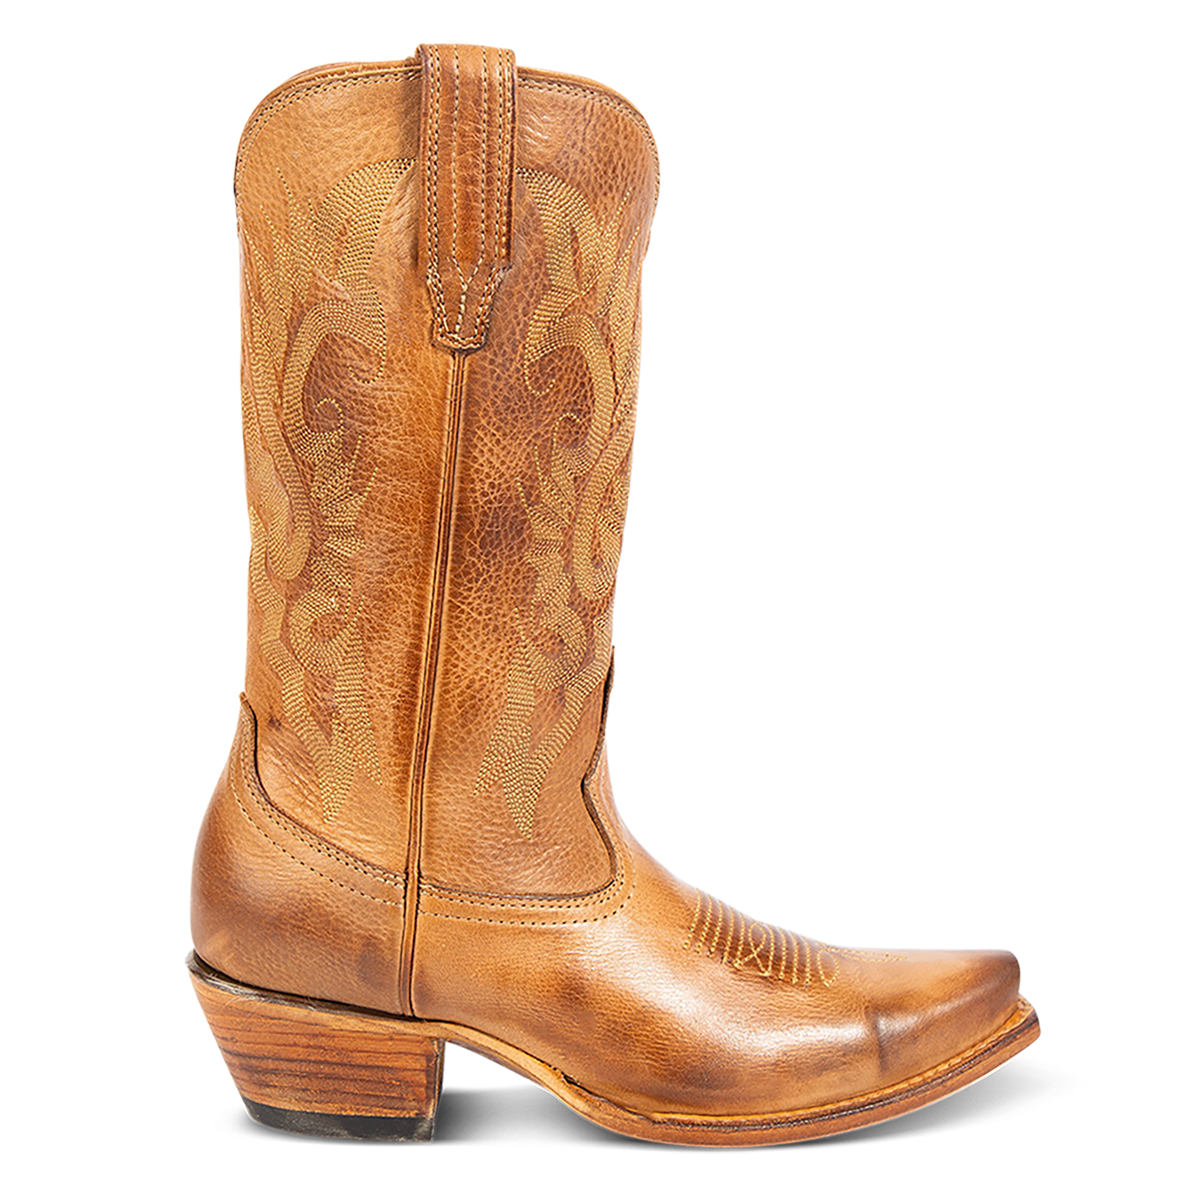 FREEBIRD women's Woody wheat leather boot with stitch detailing and snip toe construction